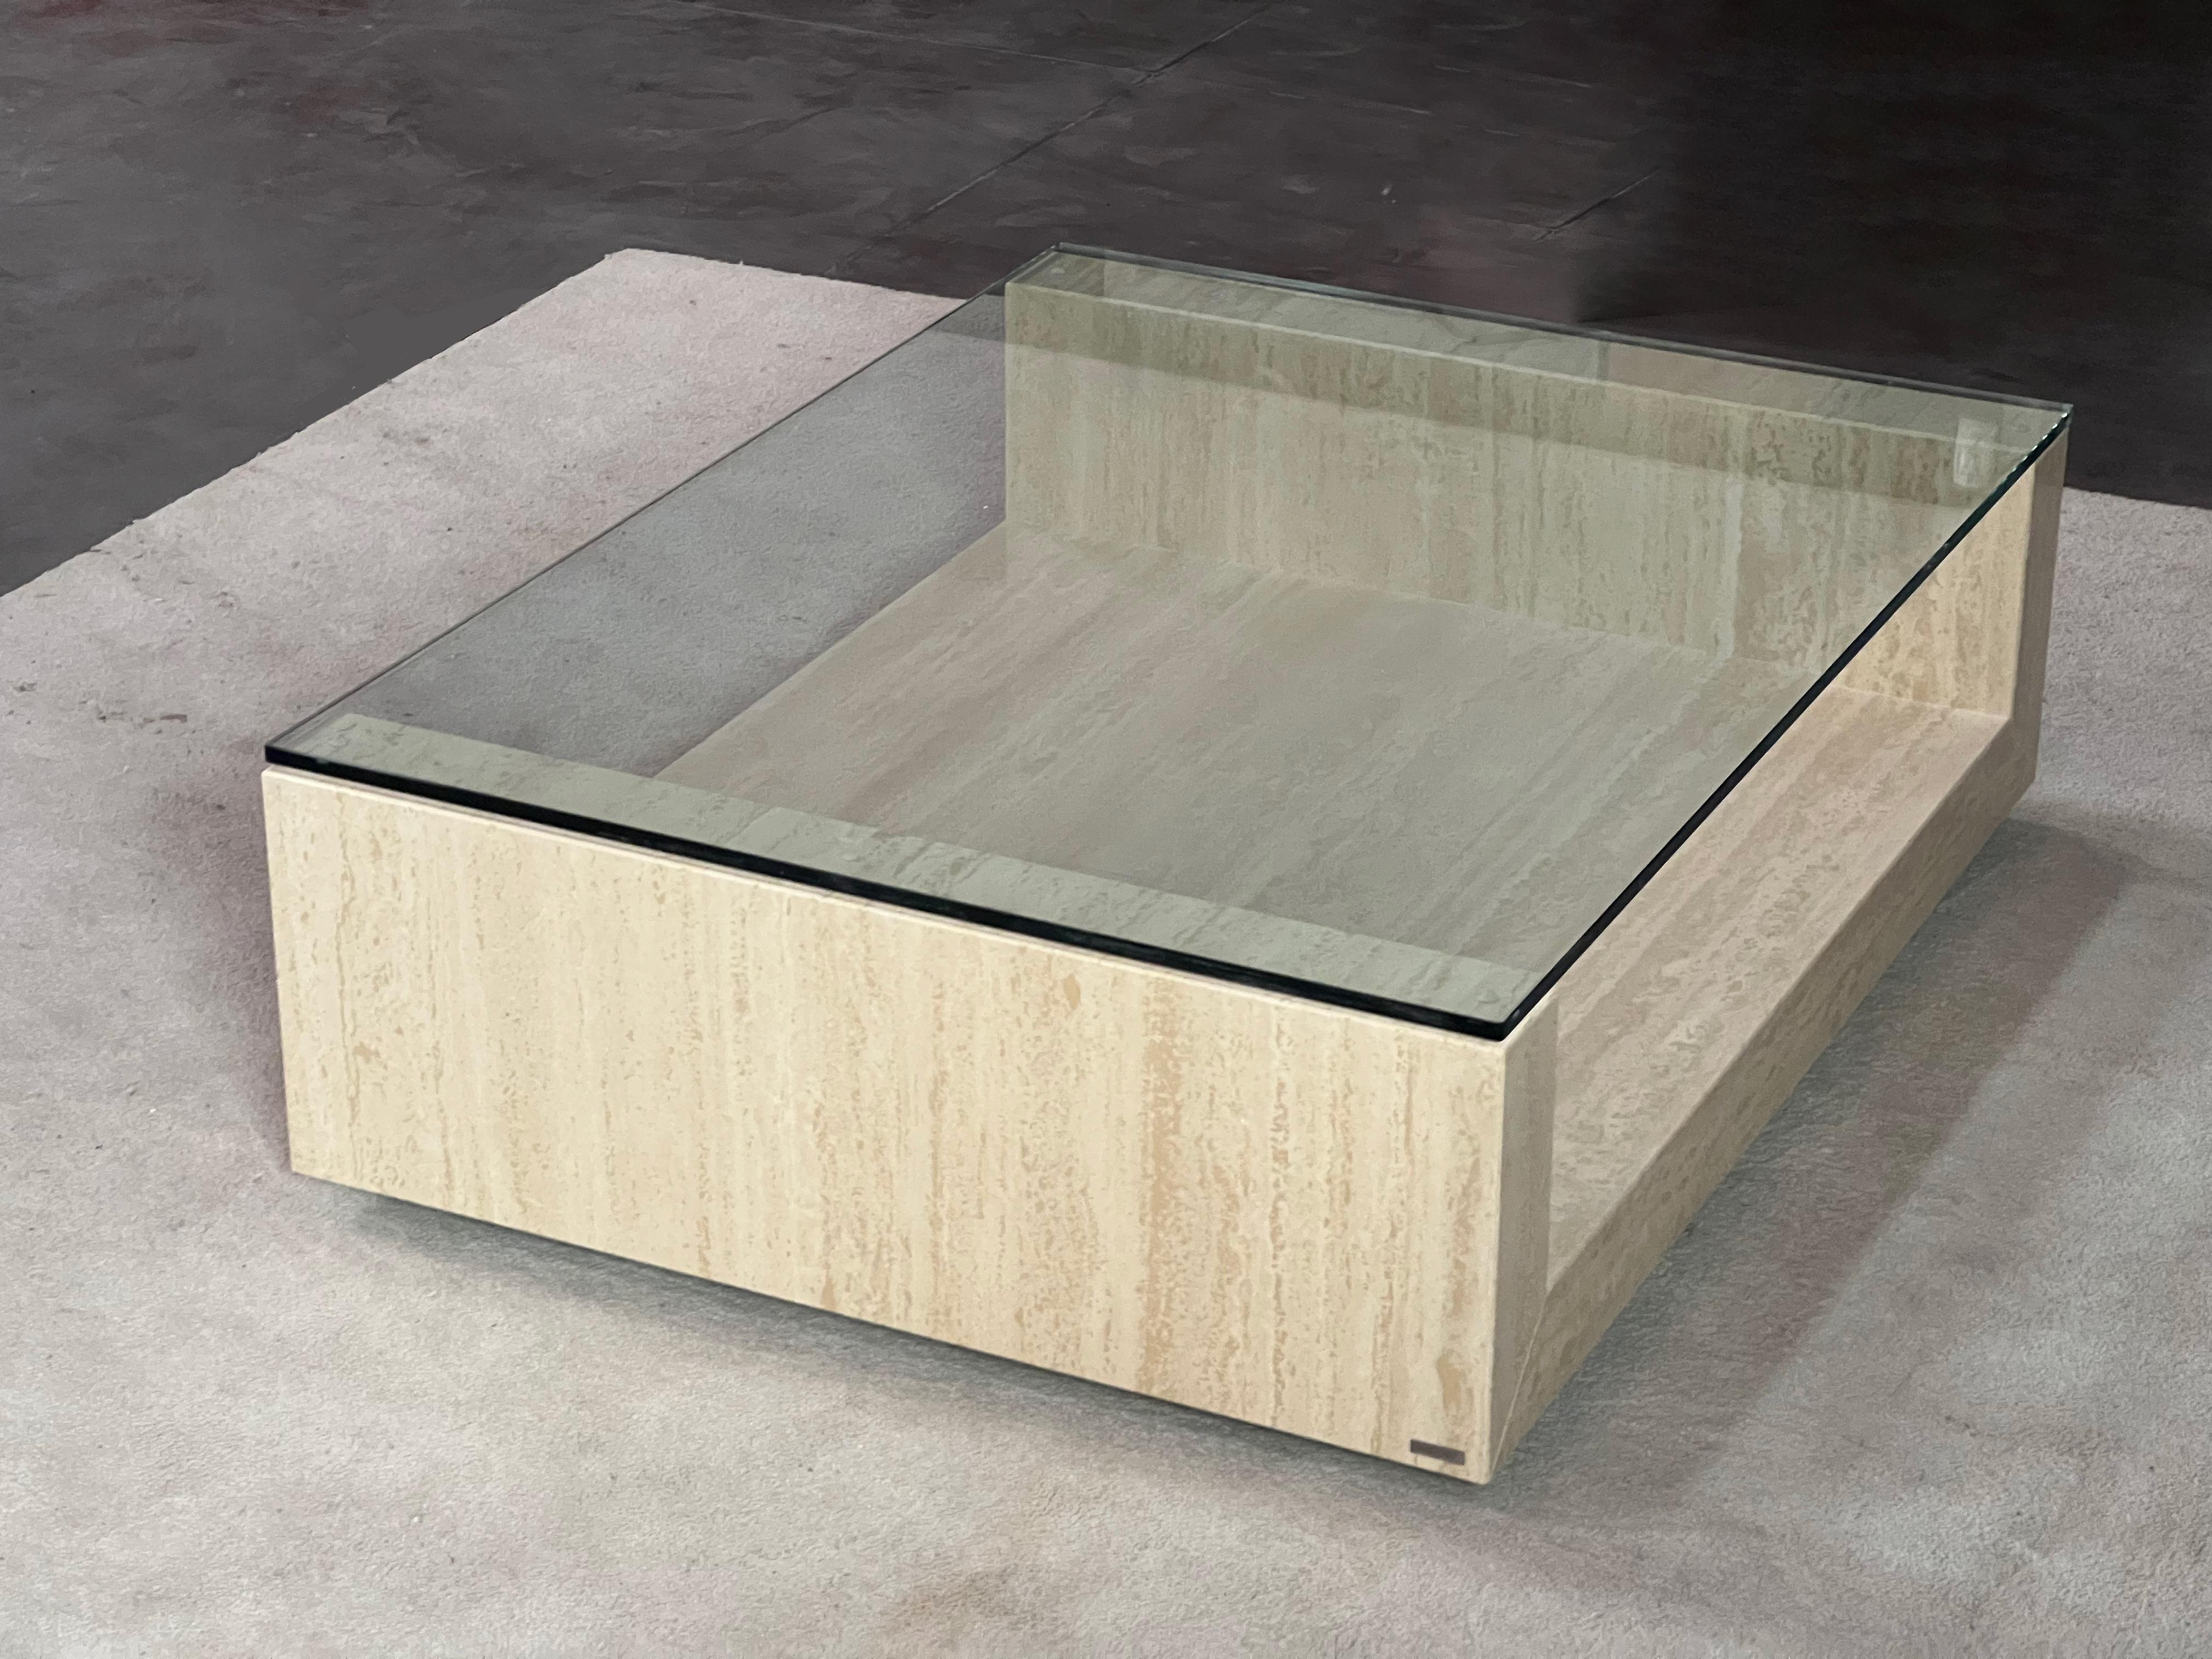 Crystal Travertine Marble AMIA Table Contemporary Design Made in Spain Meddel in Stock For Sale